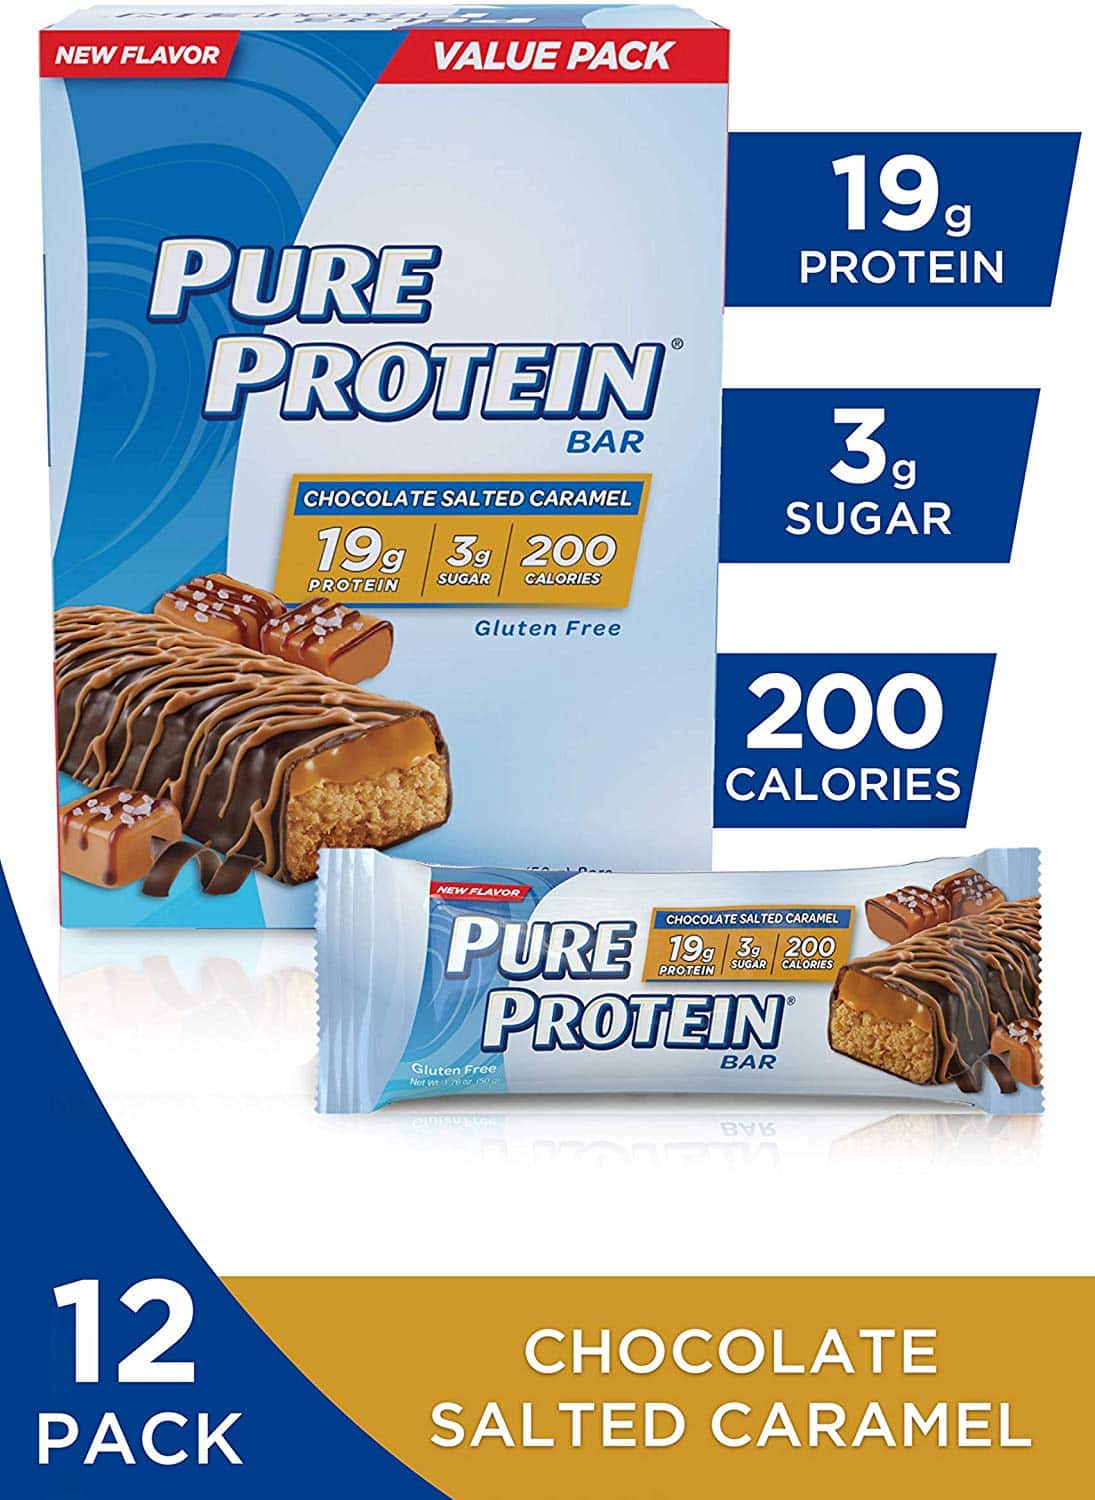 Pure Protein Bars, High Protein, Nutritious Snacks $10.79 (REG $17.59)